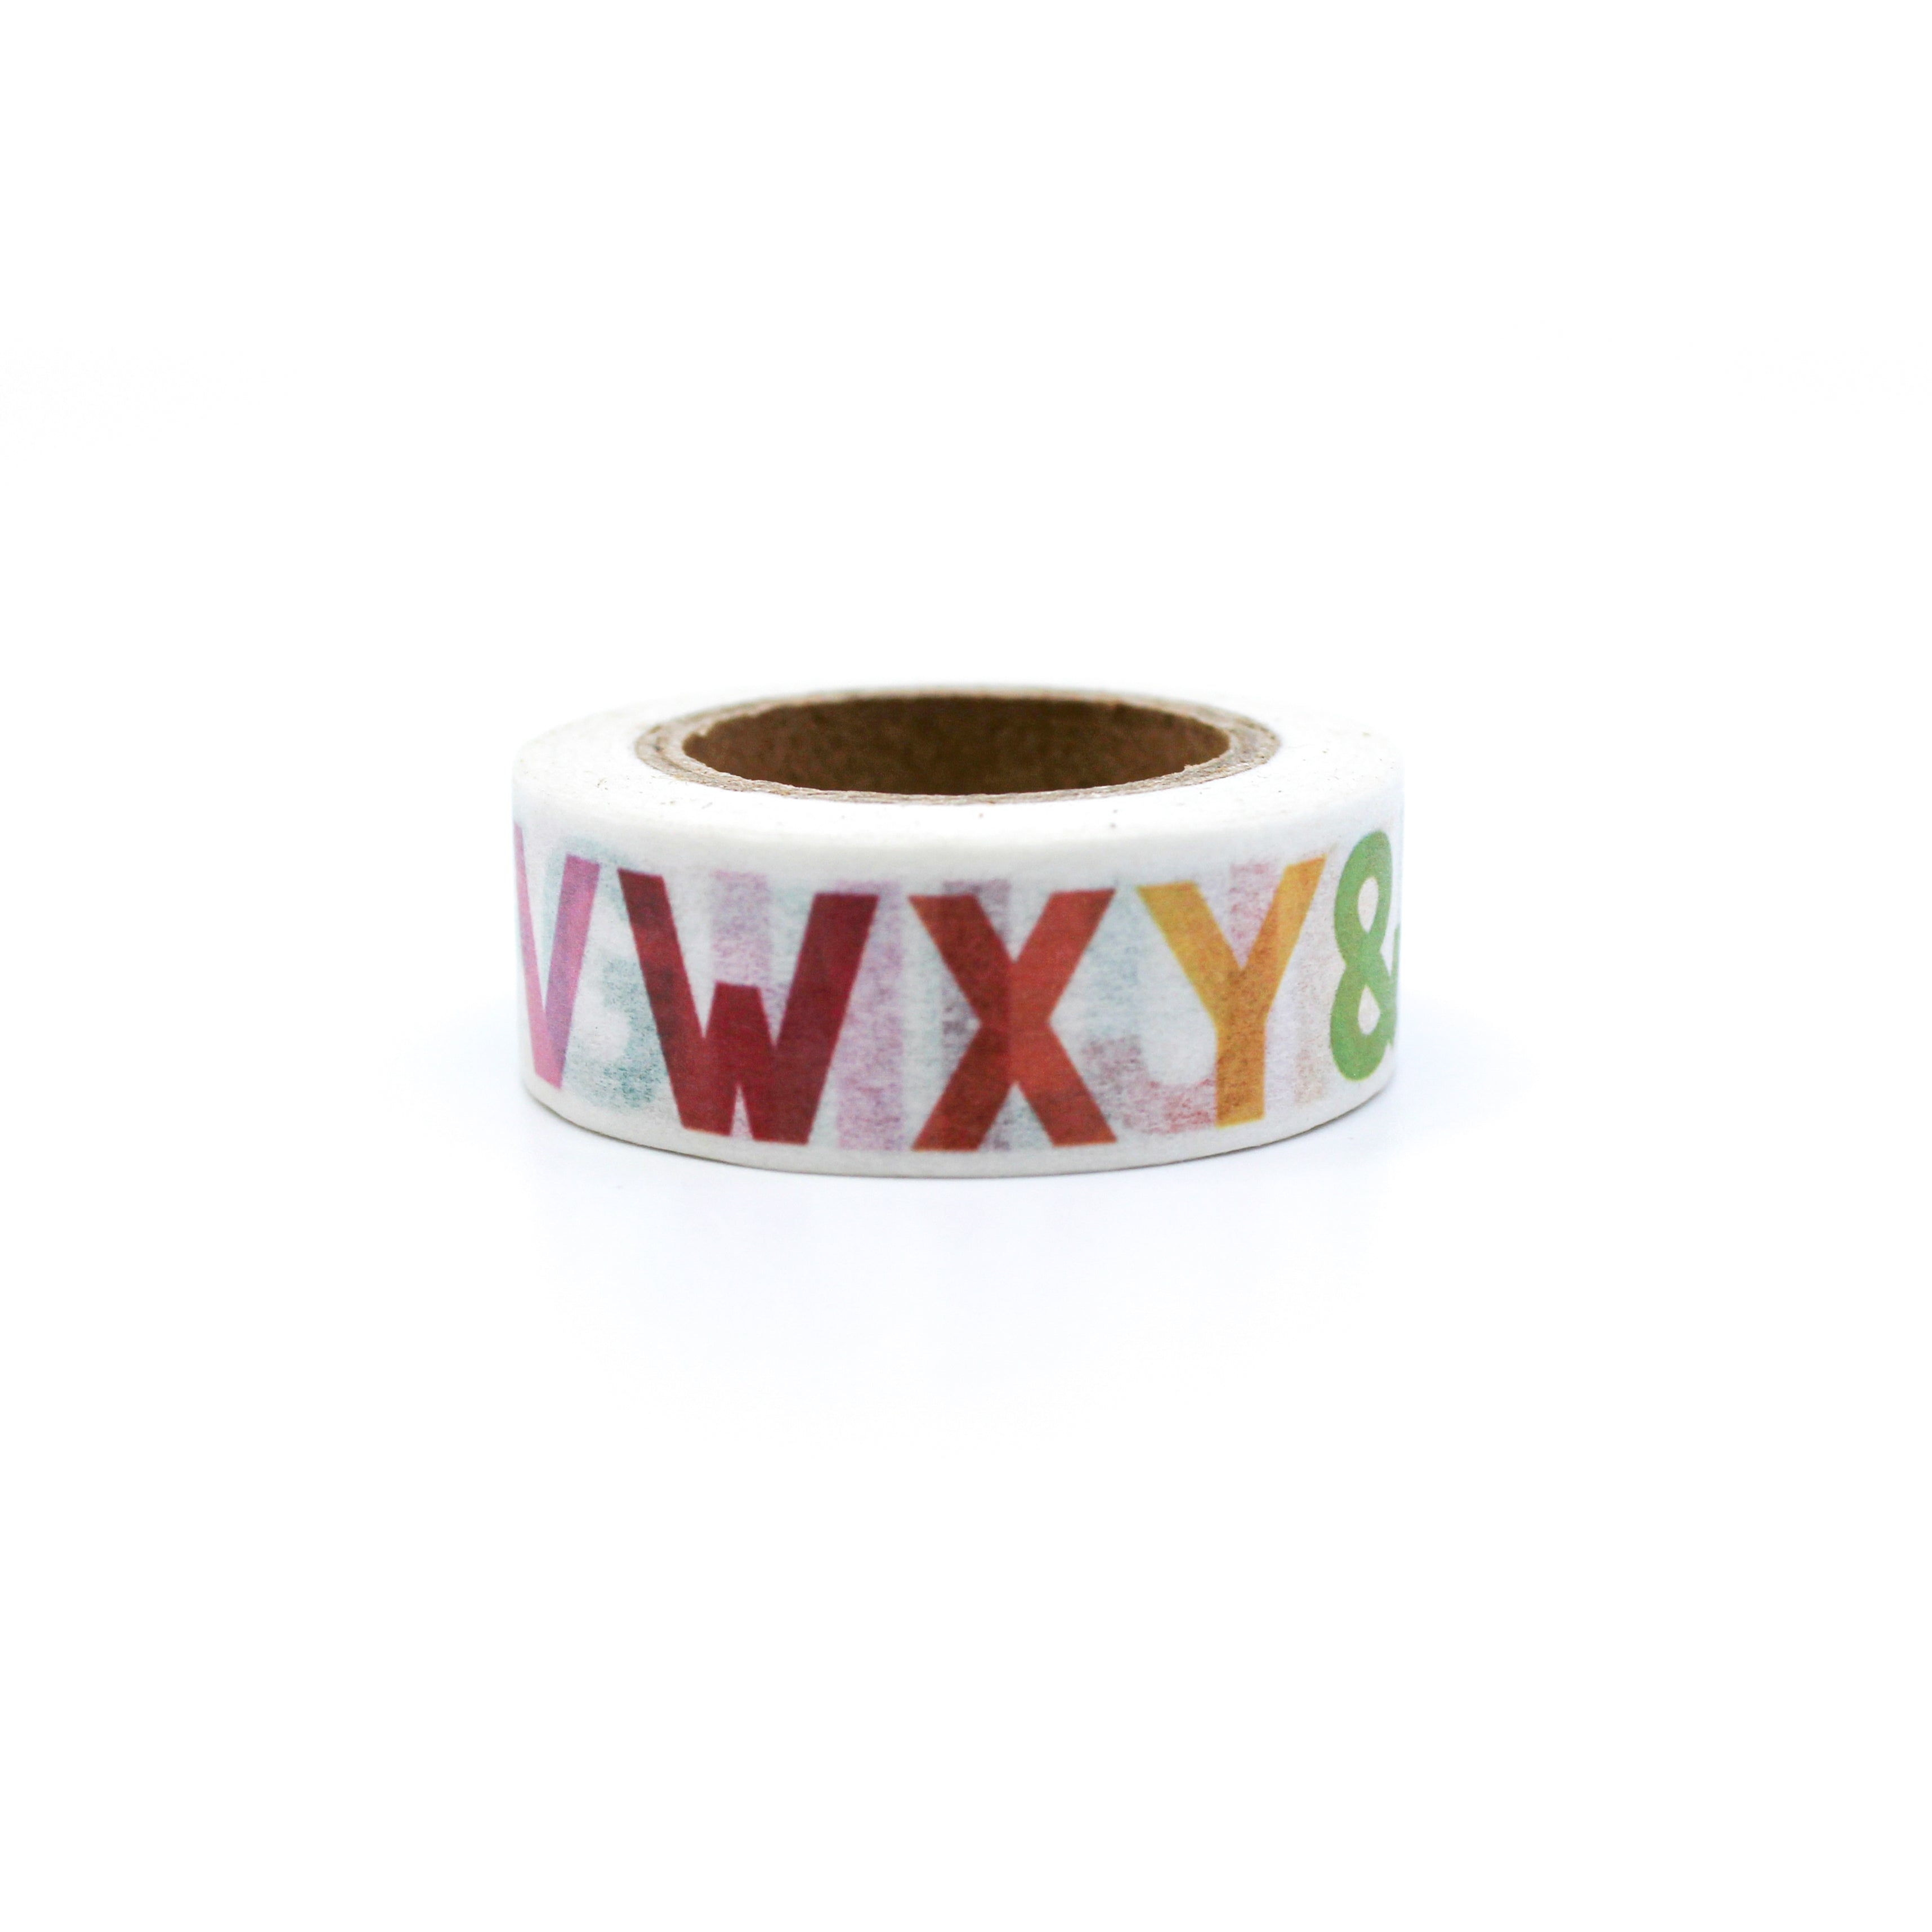 This is a cute colorful capital letters in alphabetical order washi tape from BBB Supplies Craft Shop